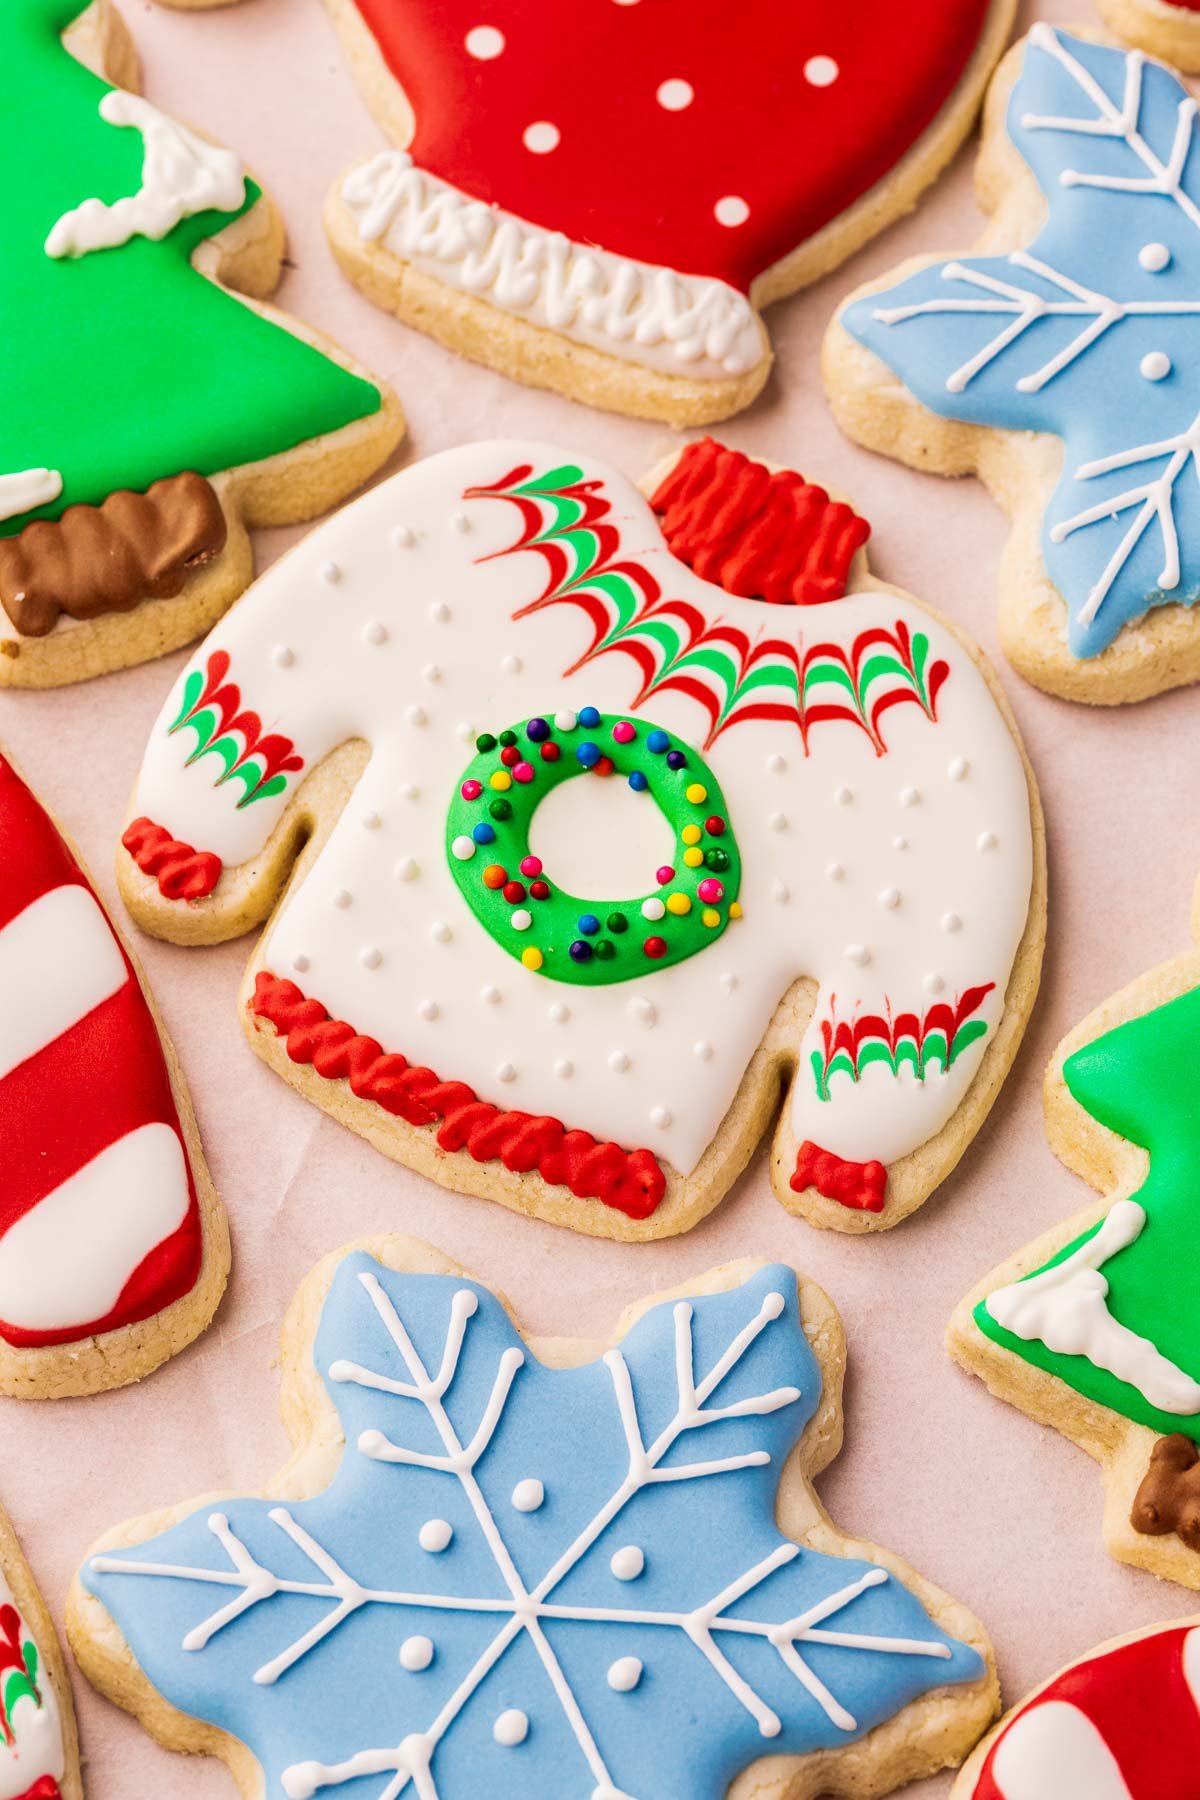 A close up of gluten-free Christmas cookies decorated as ugly Christmas sweaters, snowflakes, Christmas trees, candy canes and polka dot mittens.